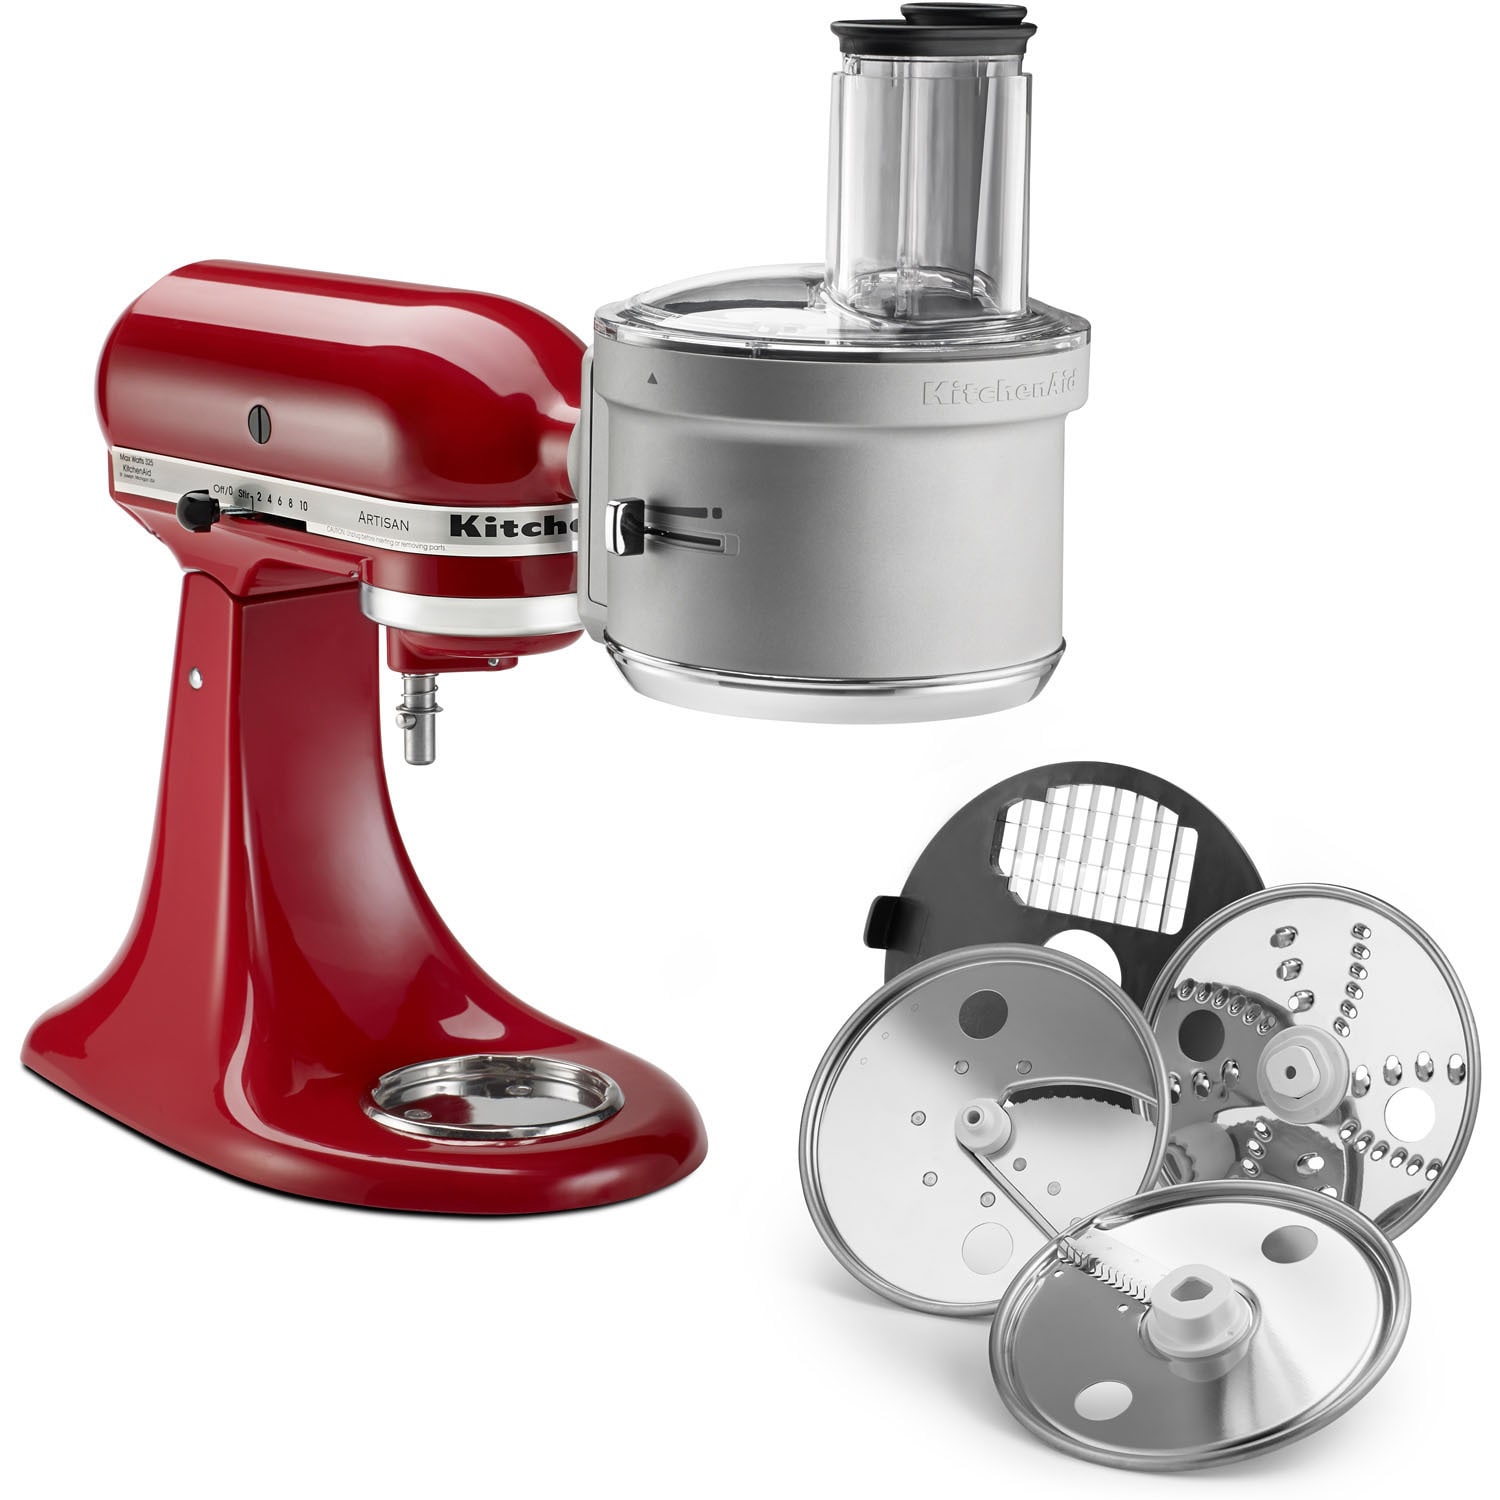 https://ak1.ostkcdn.com/images/products/9319117/KitchenAid-KSM2FPA-Food-Processor-Attachment-with-Commercial-Style-Dicing-Kit-1533feef-2e7a-46b9-929a-c2169edec31b.jpg